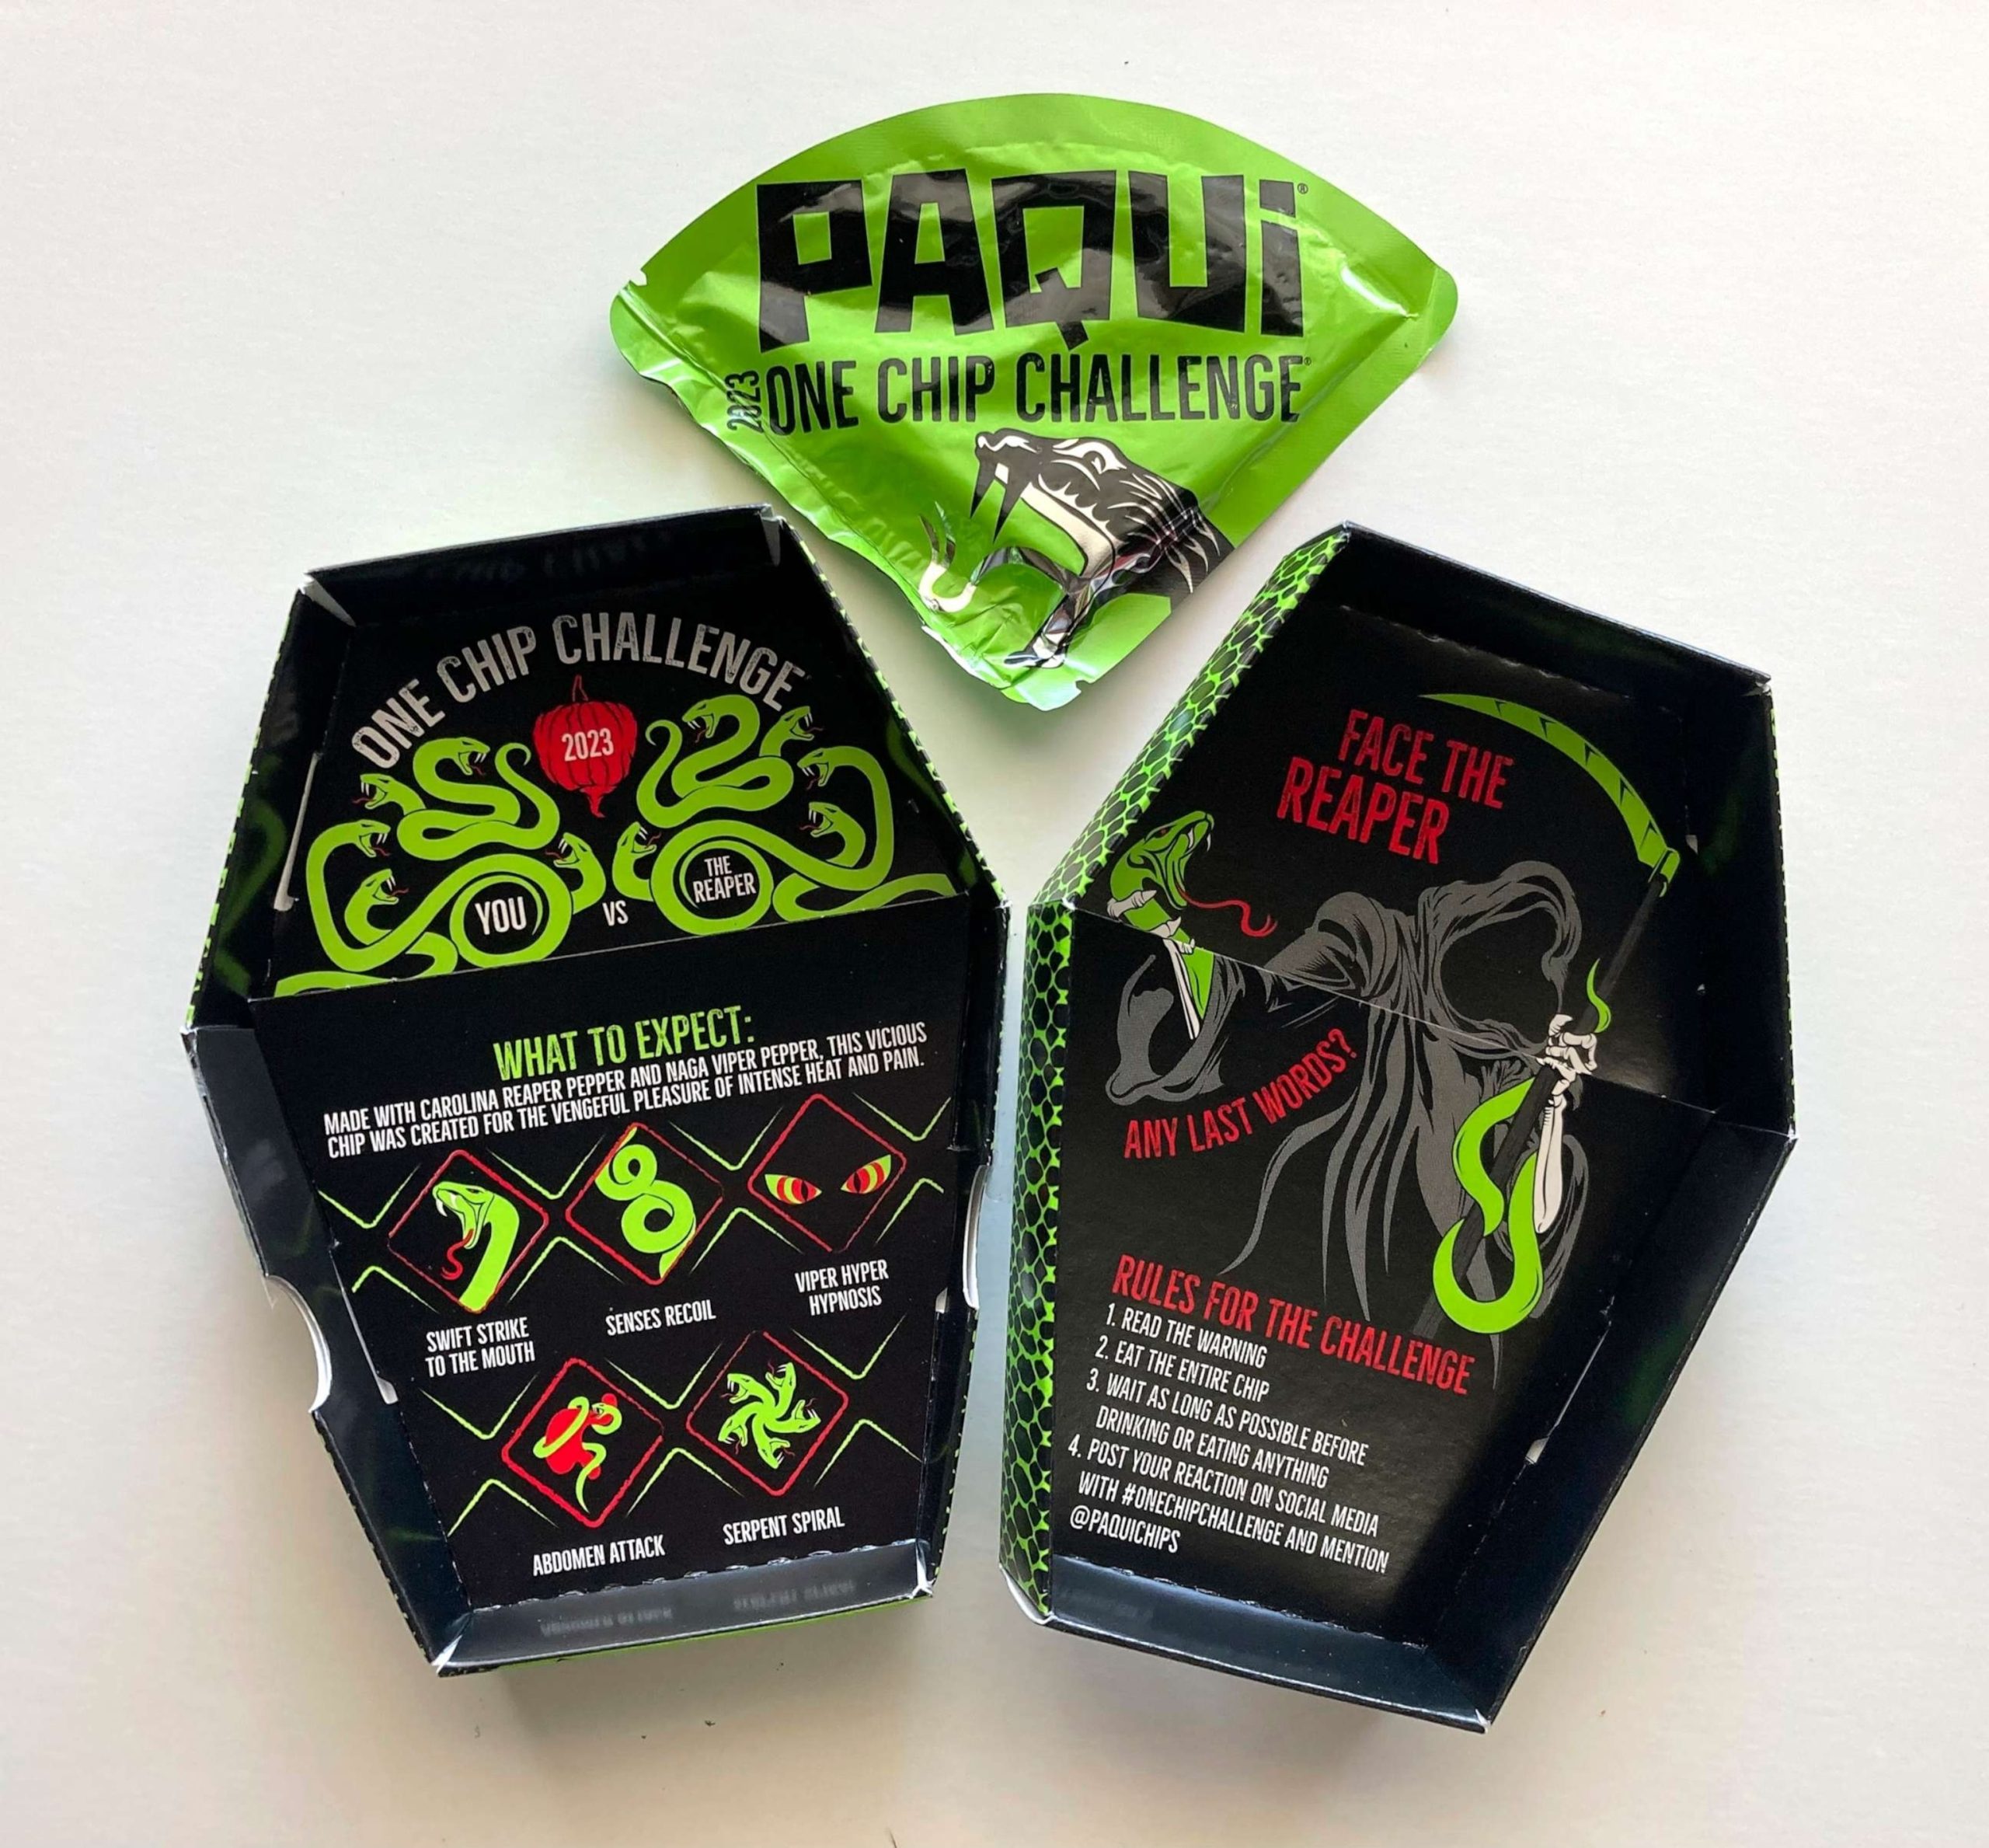 Paqui removes 'One Chip Challenge' product from store shelves